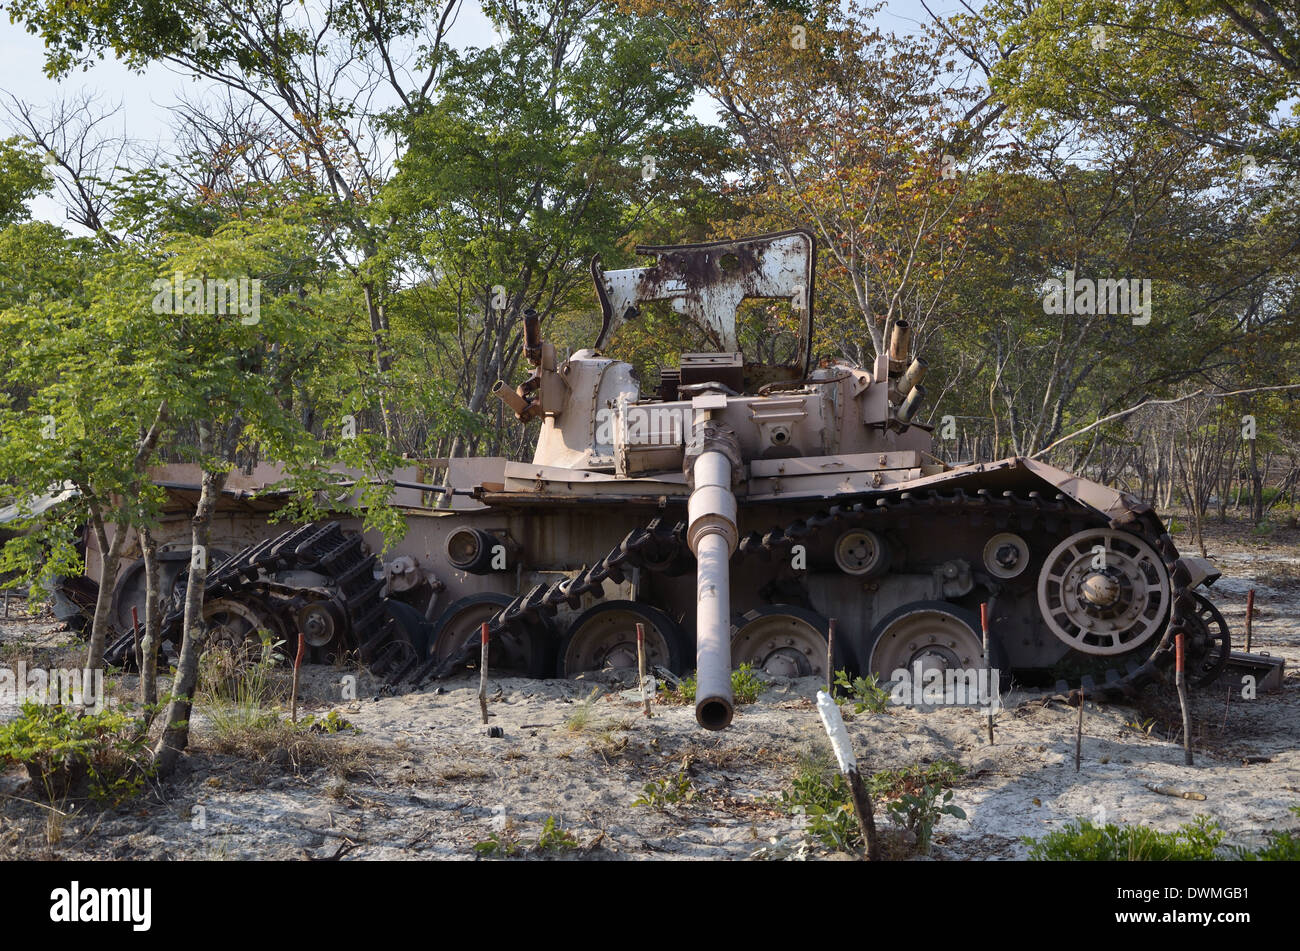 Destroyed tank, Cuito Cuanavale, Angola. Stock Photo